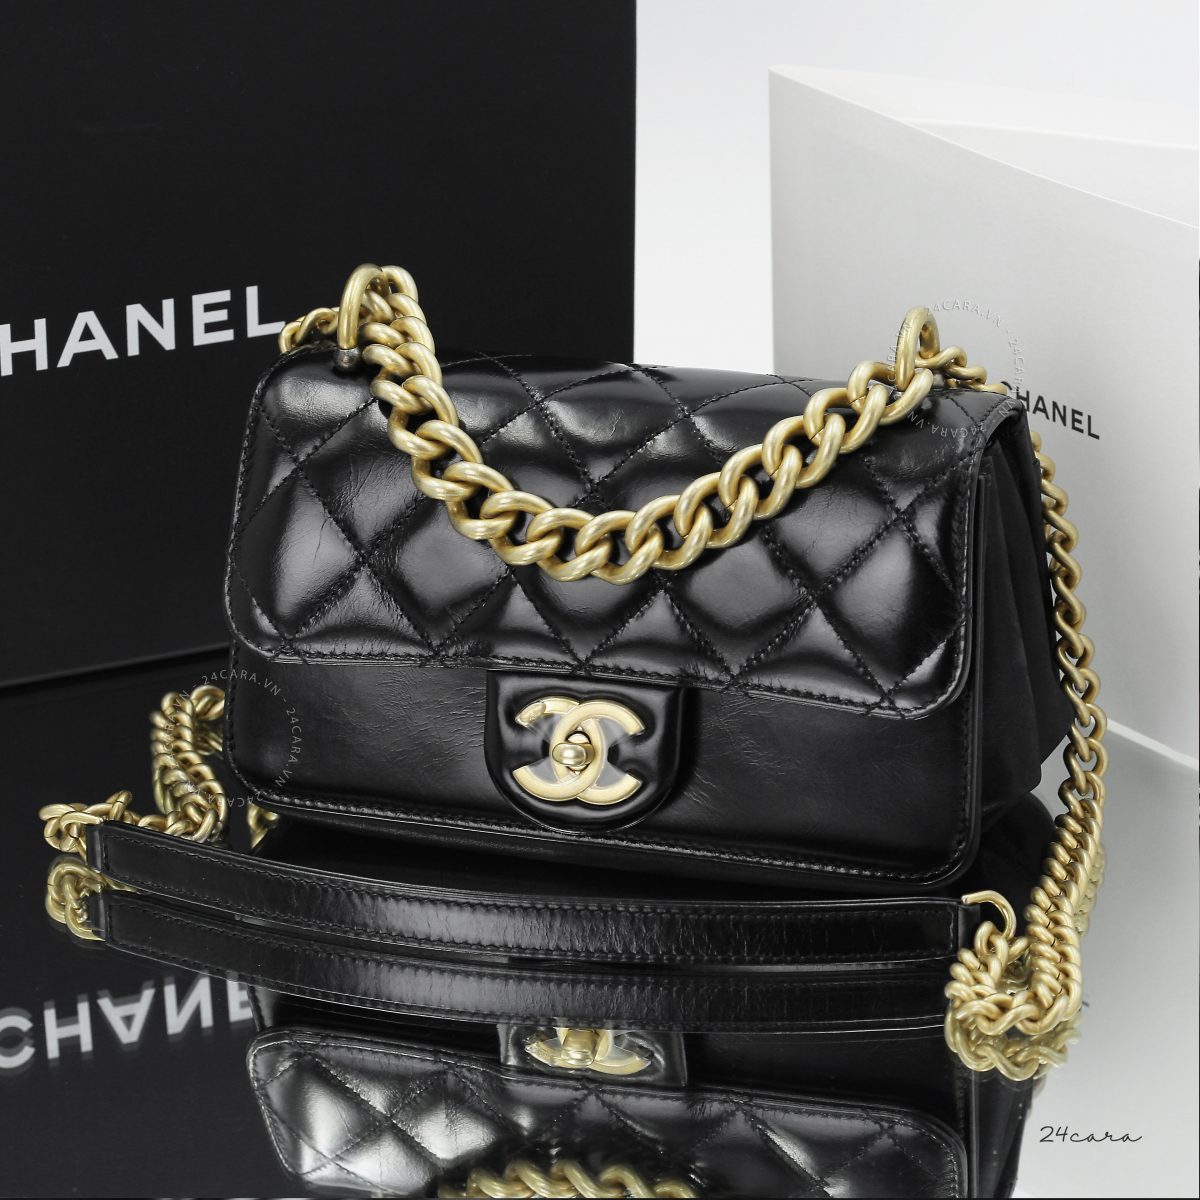 CHANEL FLAP BAG WITH GOLD HARDWARE IN LAMBSKIN LEATHER